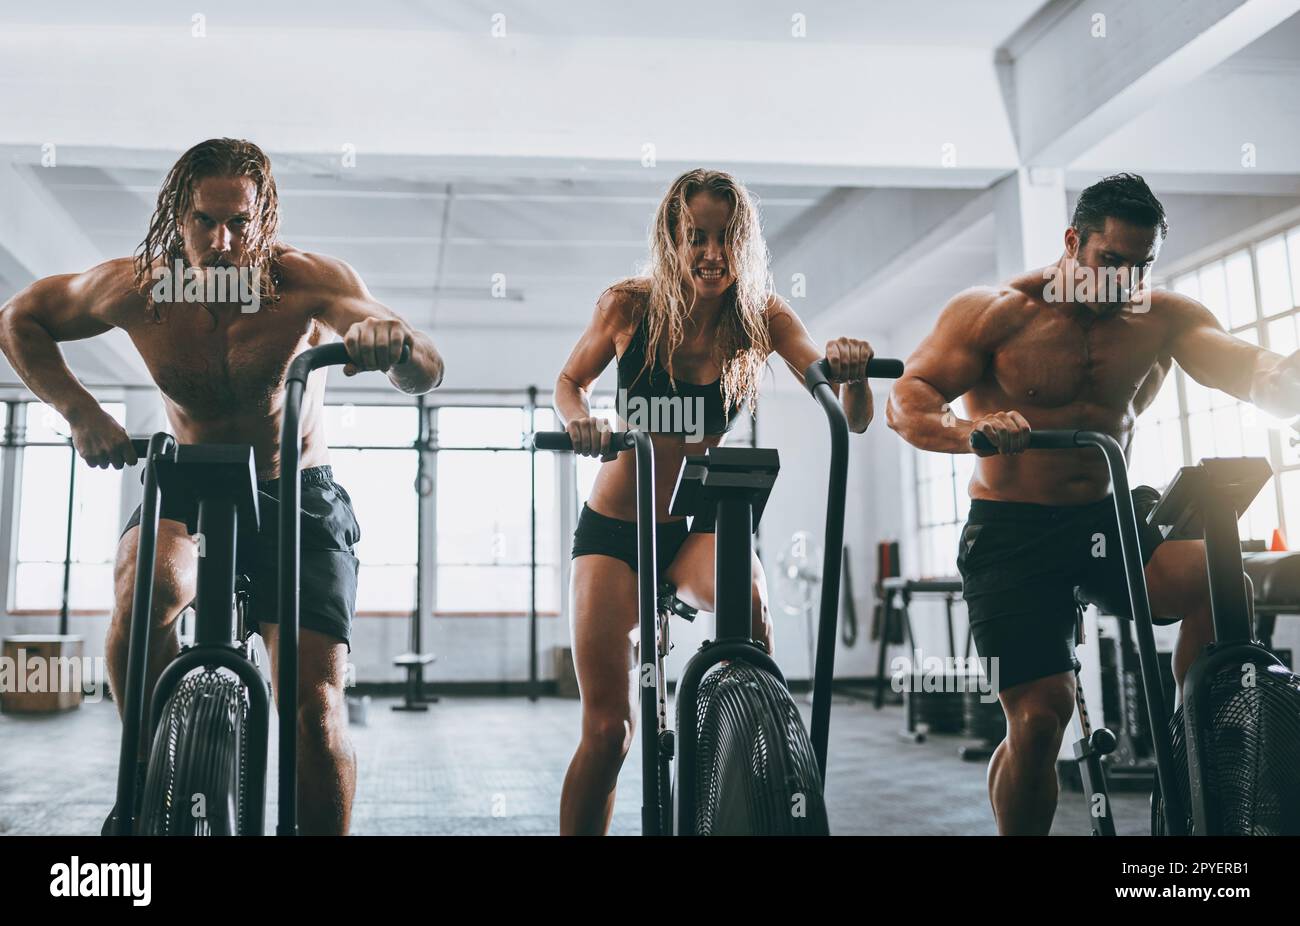 Pure dedication. three people working out on elliptical machines. Stock Photo